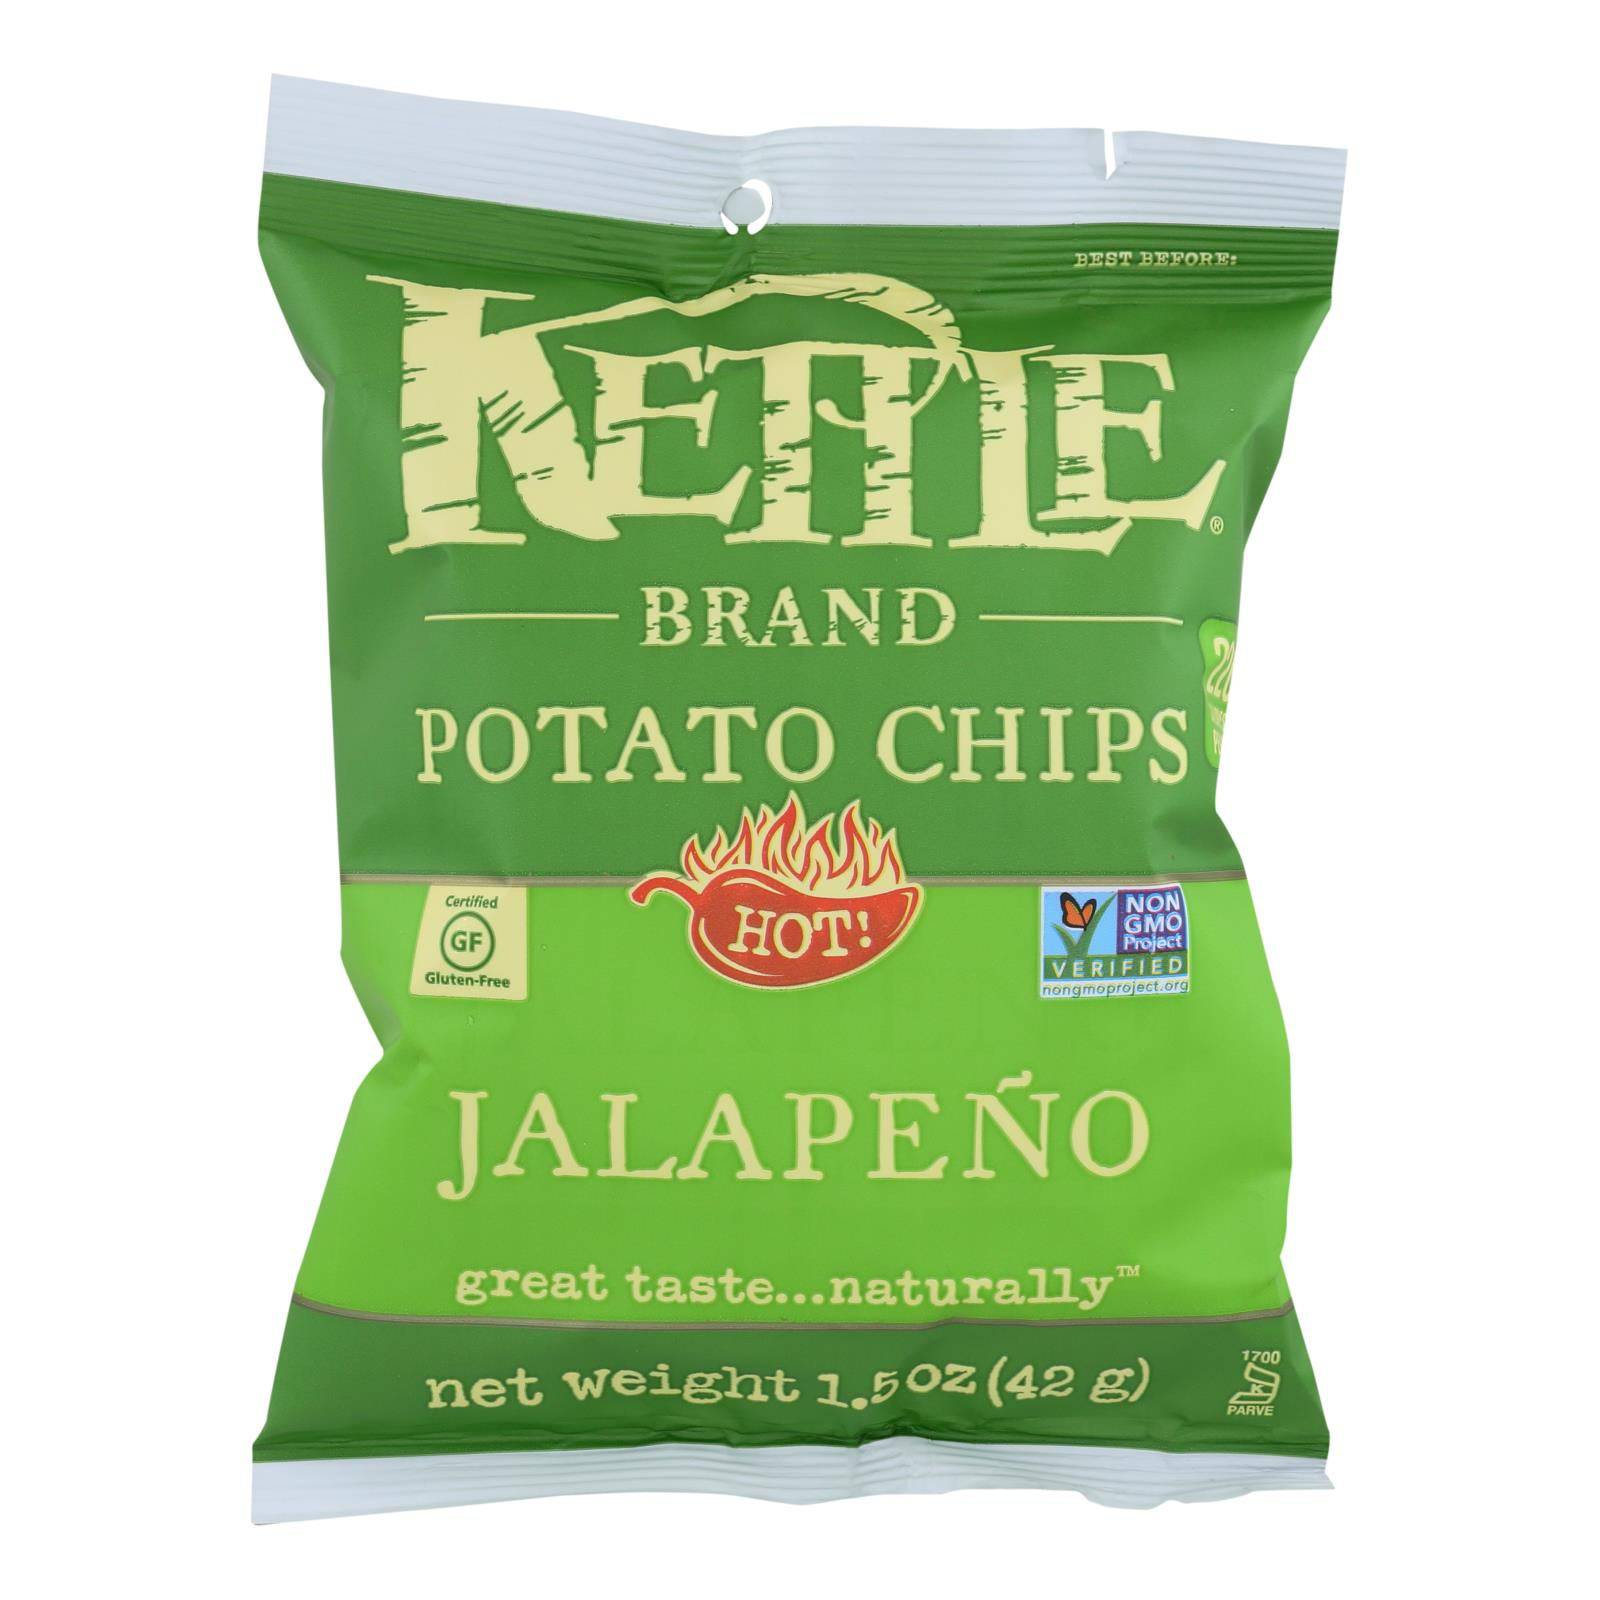 Buy Kettle Brand Potato Chips - Jalapeno - Hot - 1.5 Oz - Case Of 24  at OnlyNaturals.us